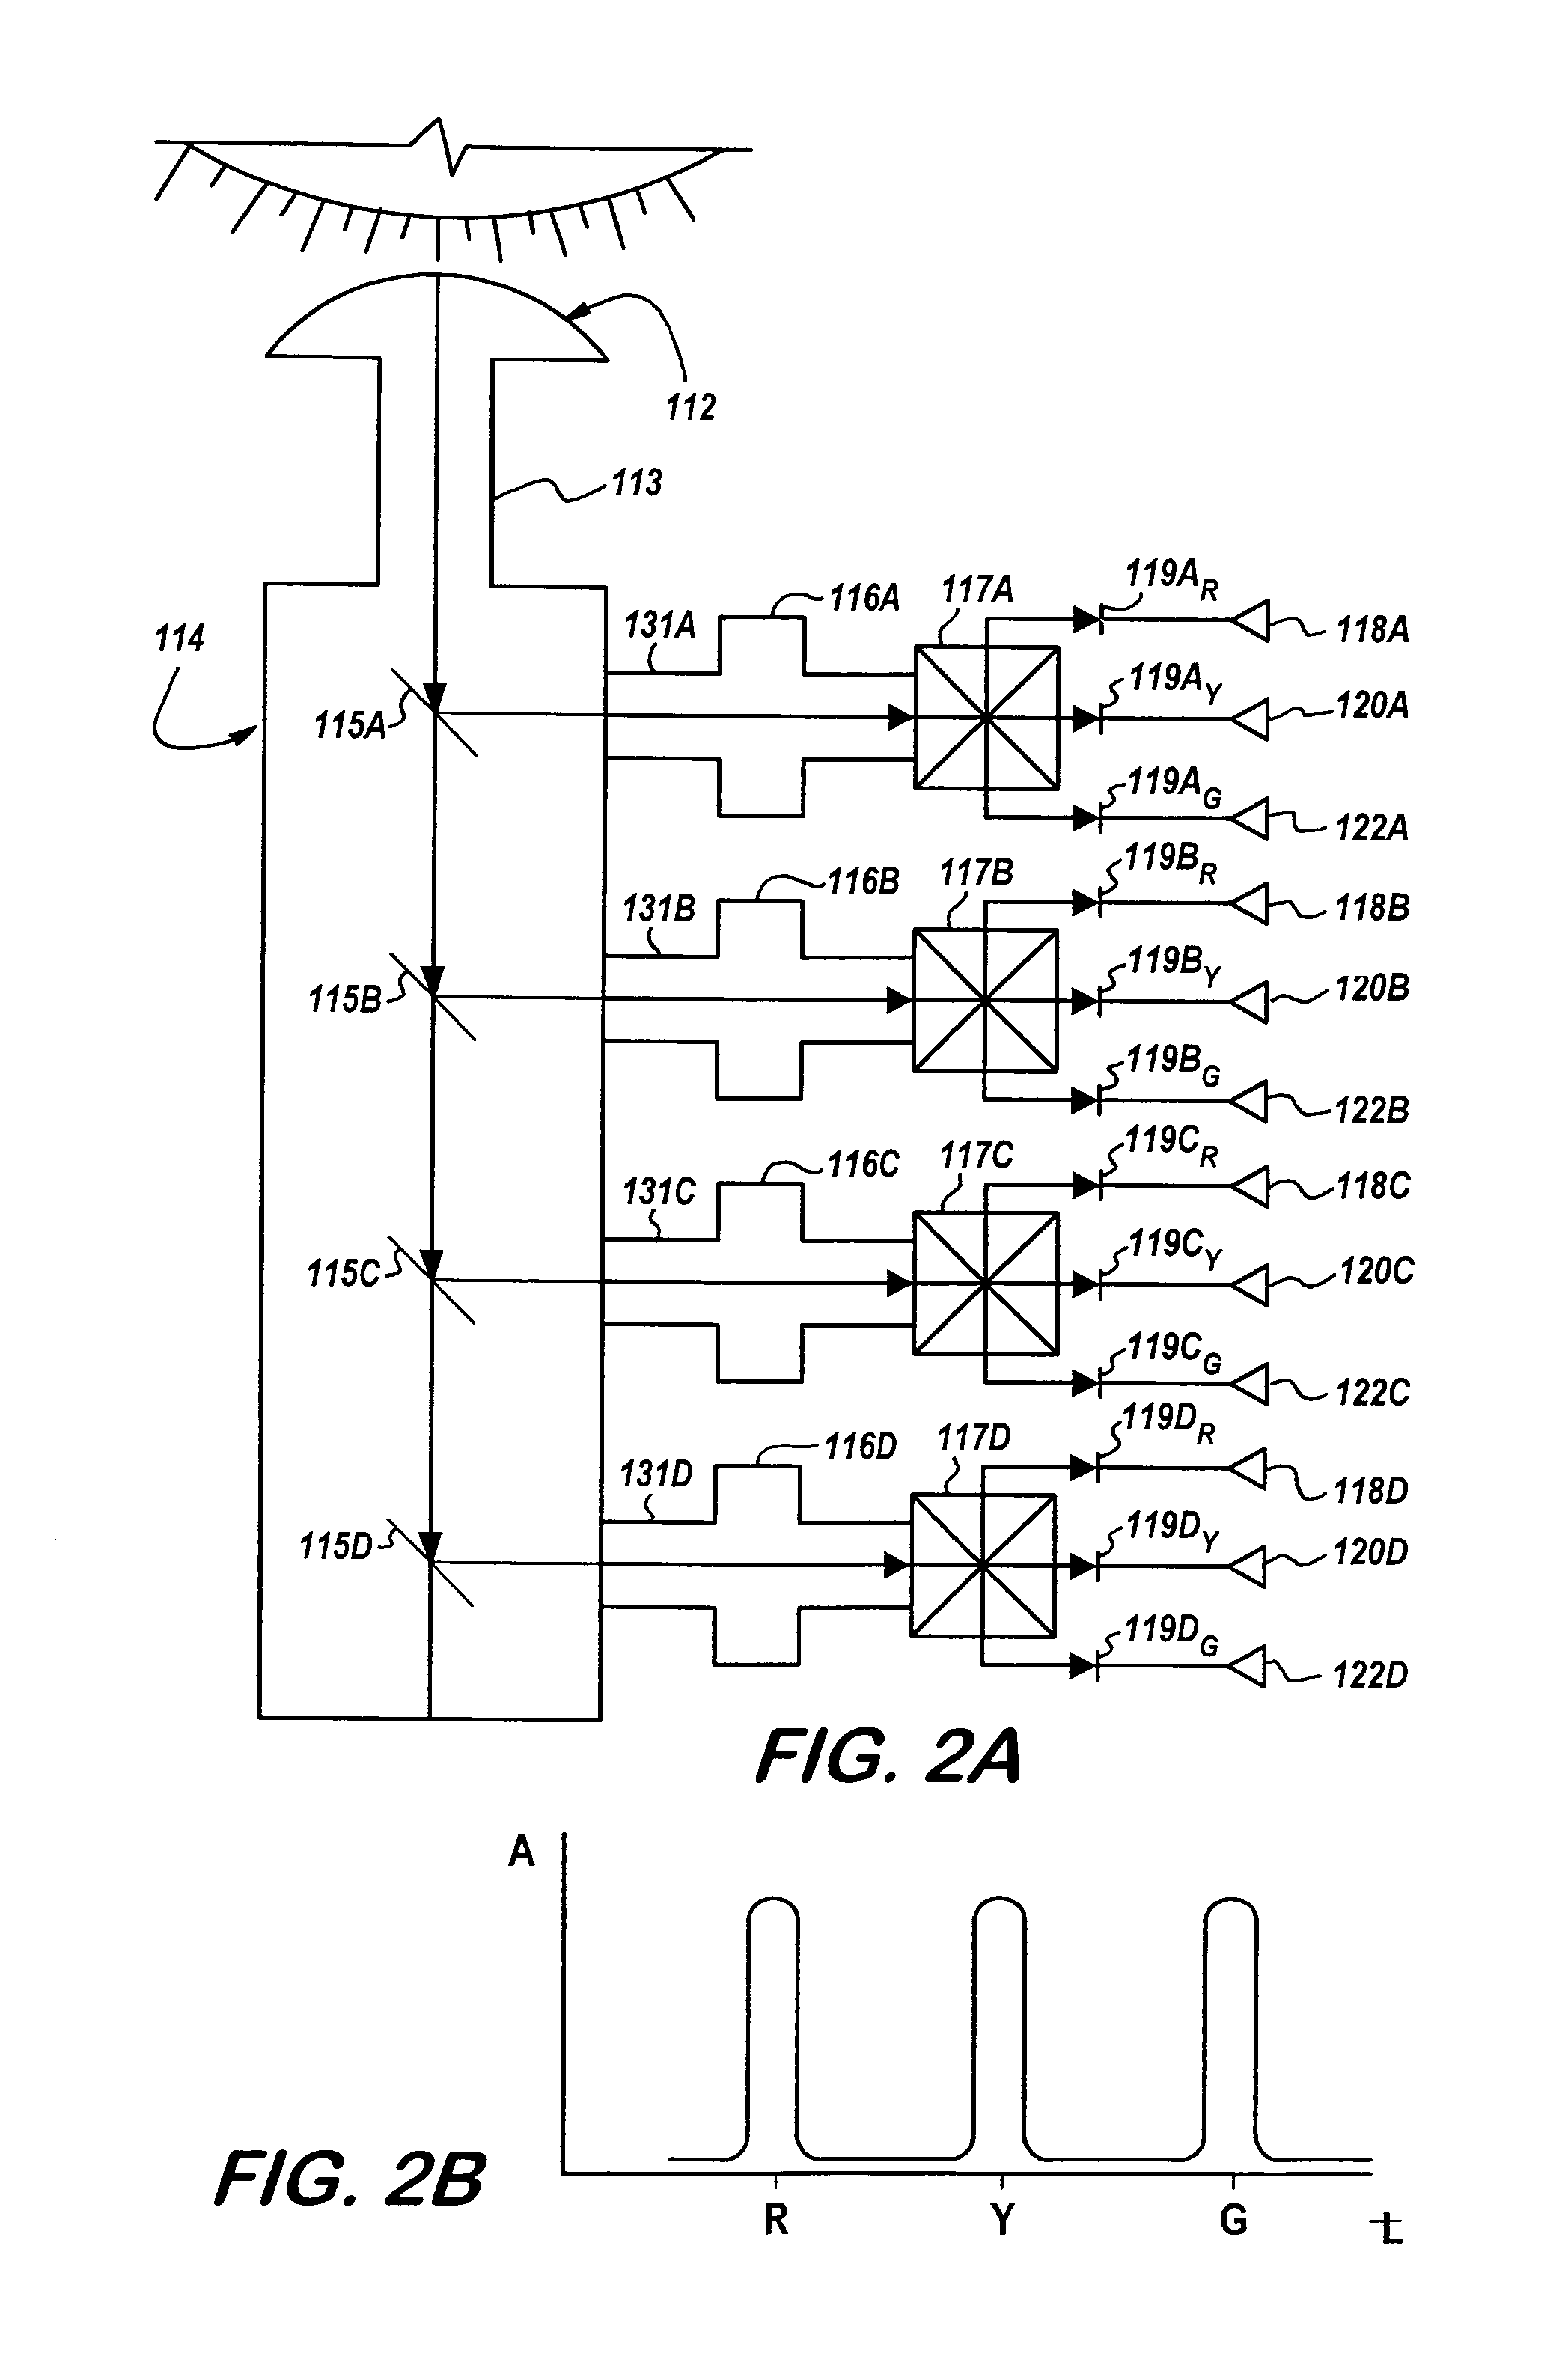 Self contained and powered traffic signal using natural and artificial light